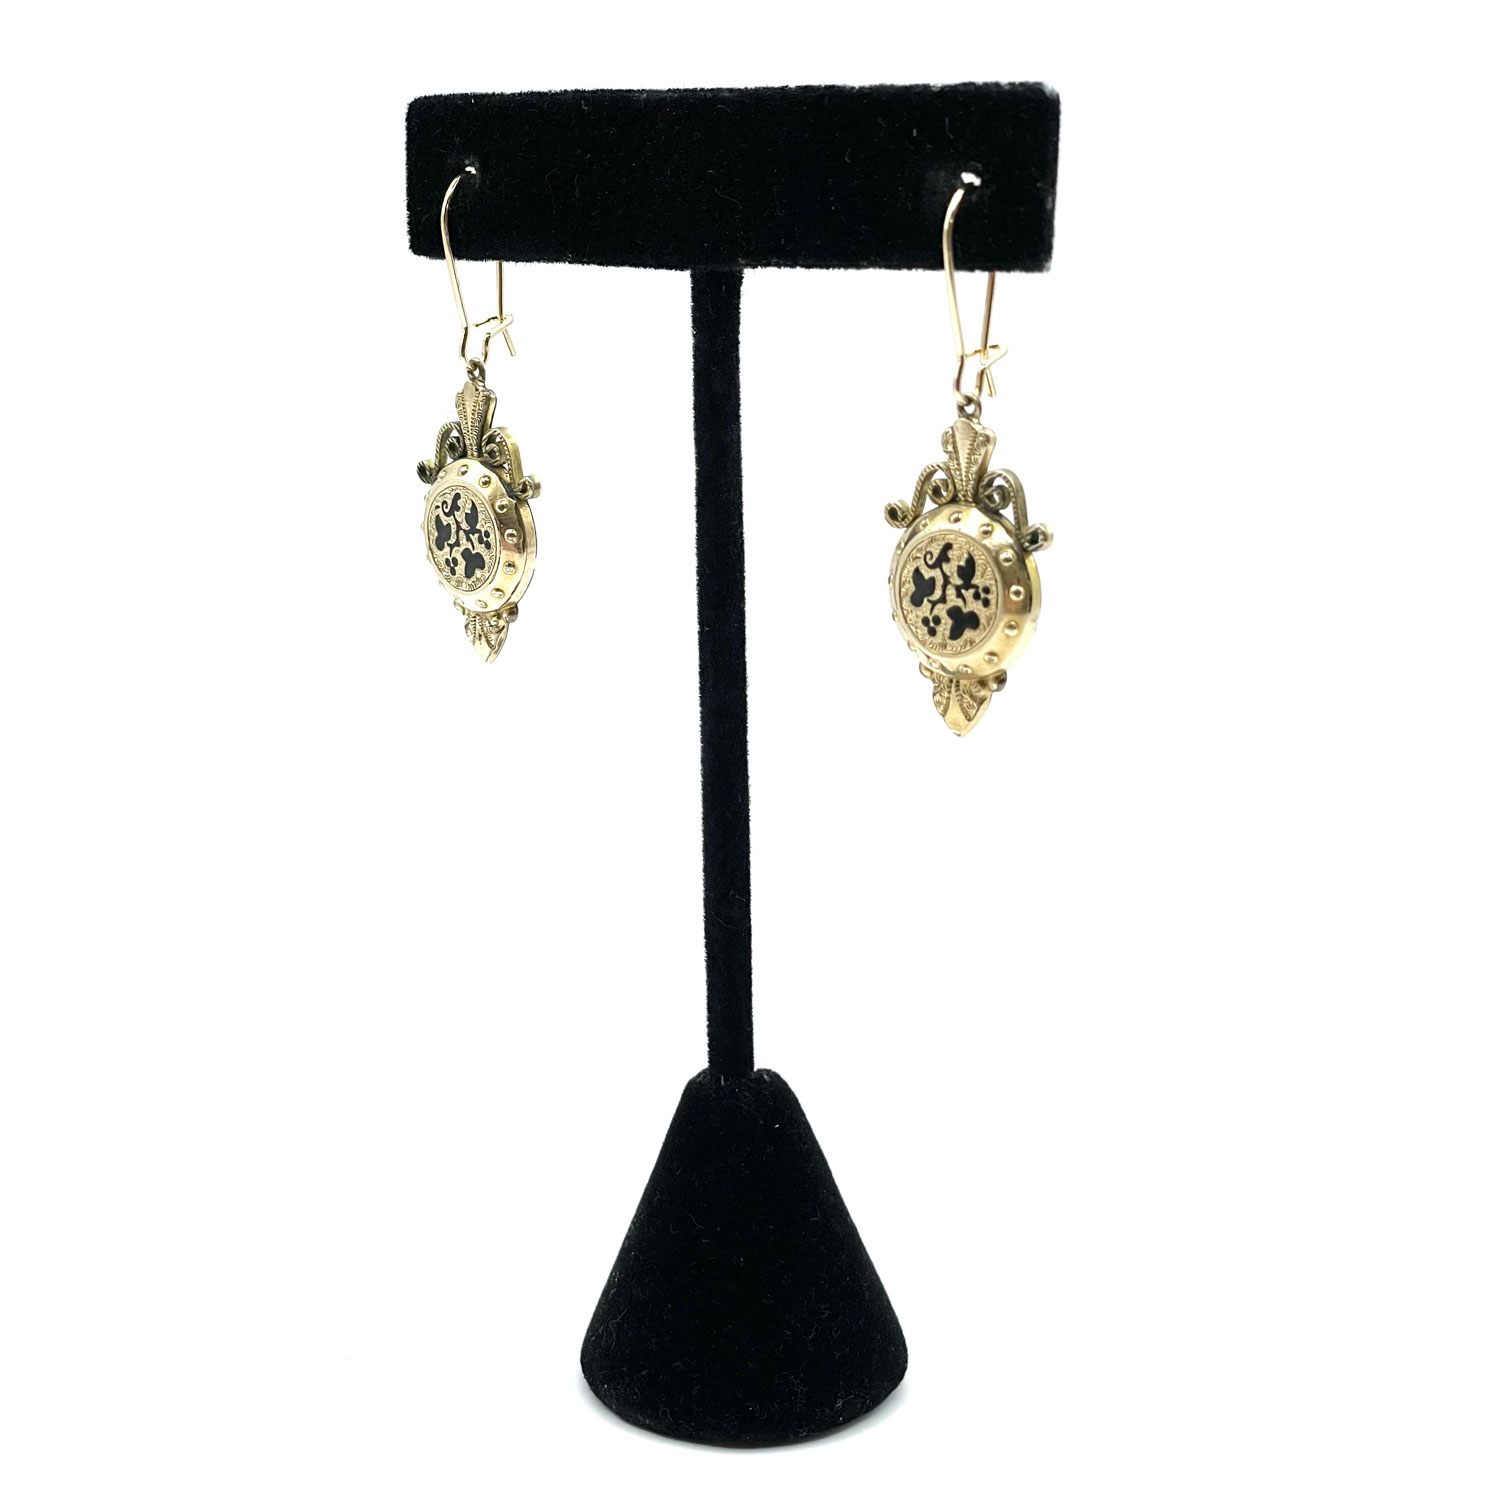 Antique gold filled earrings